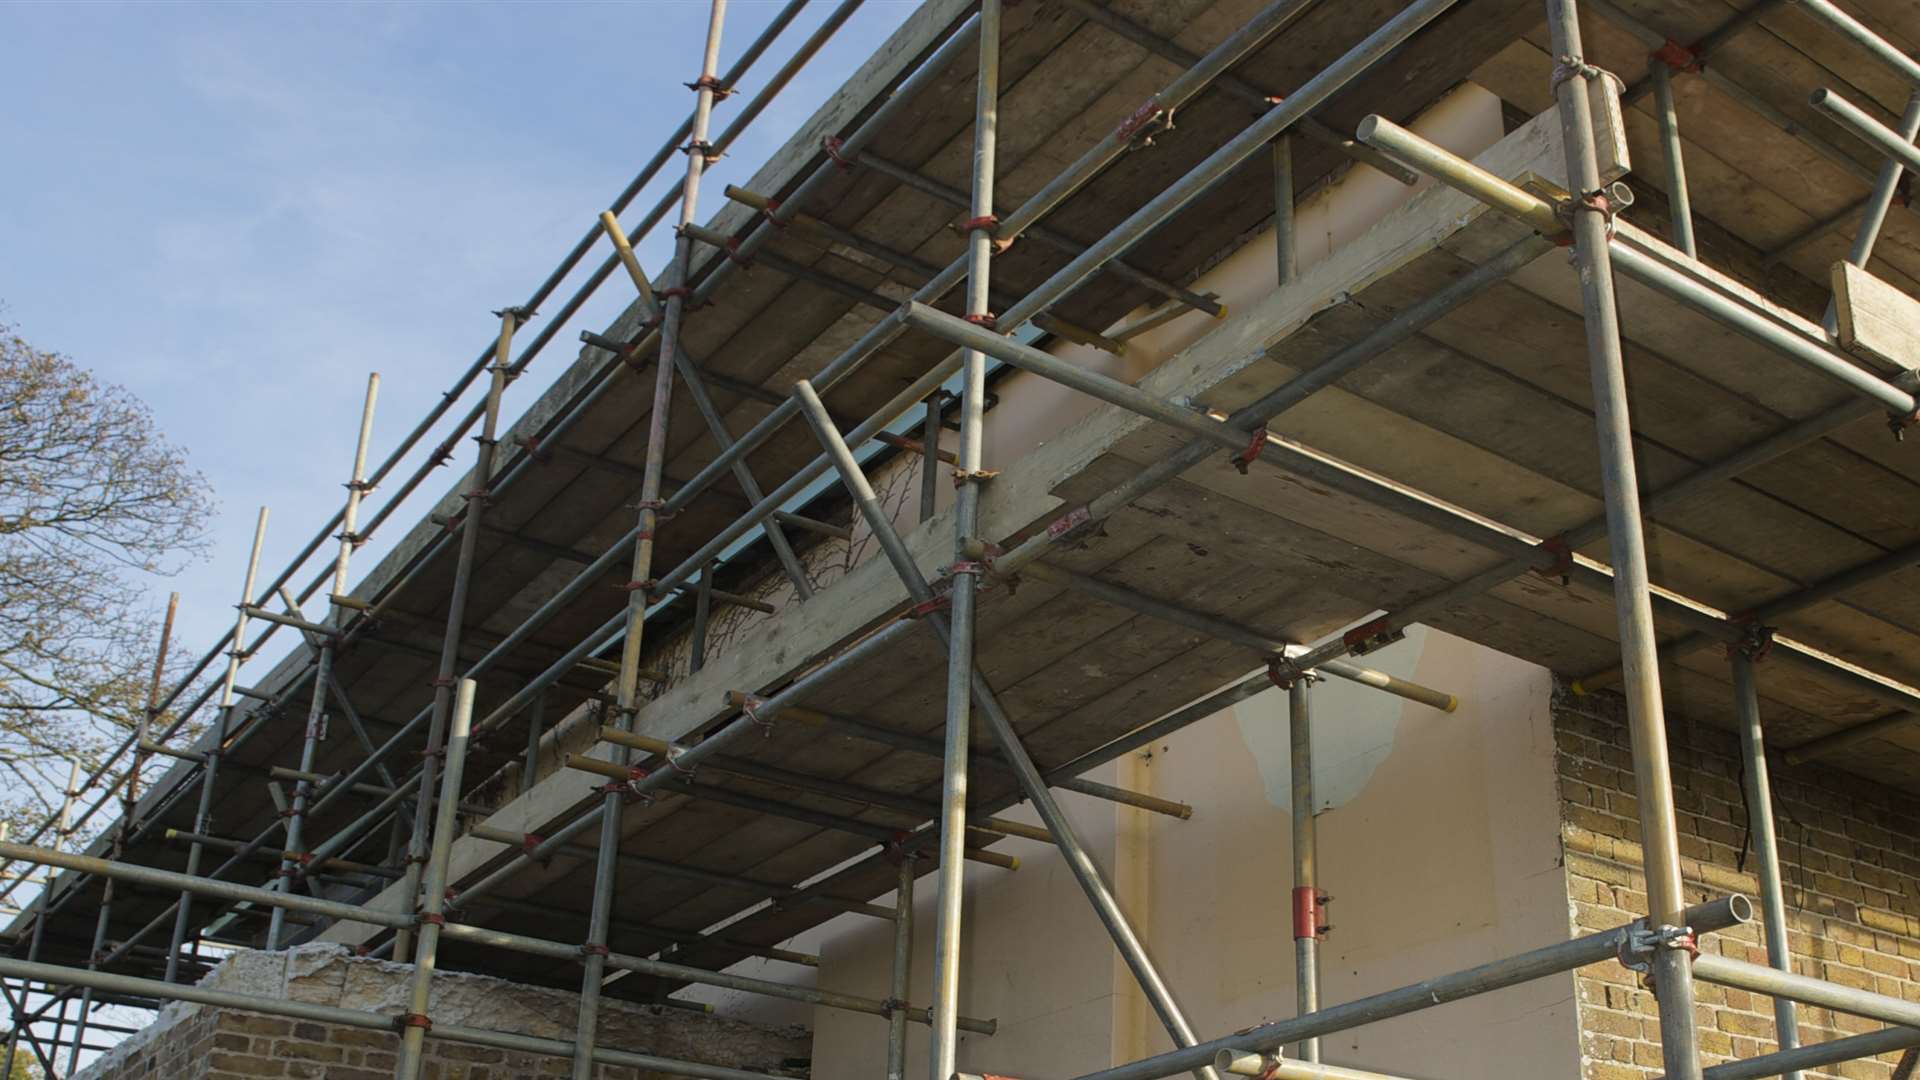 Scaffolding worth £4,000 was taken according to police. Stock picture